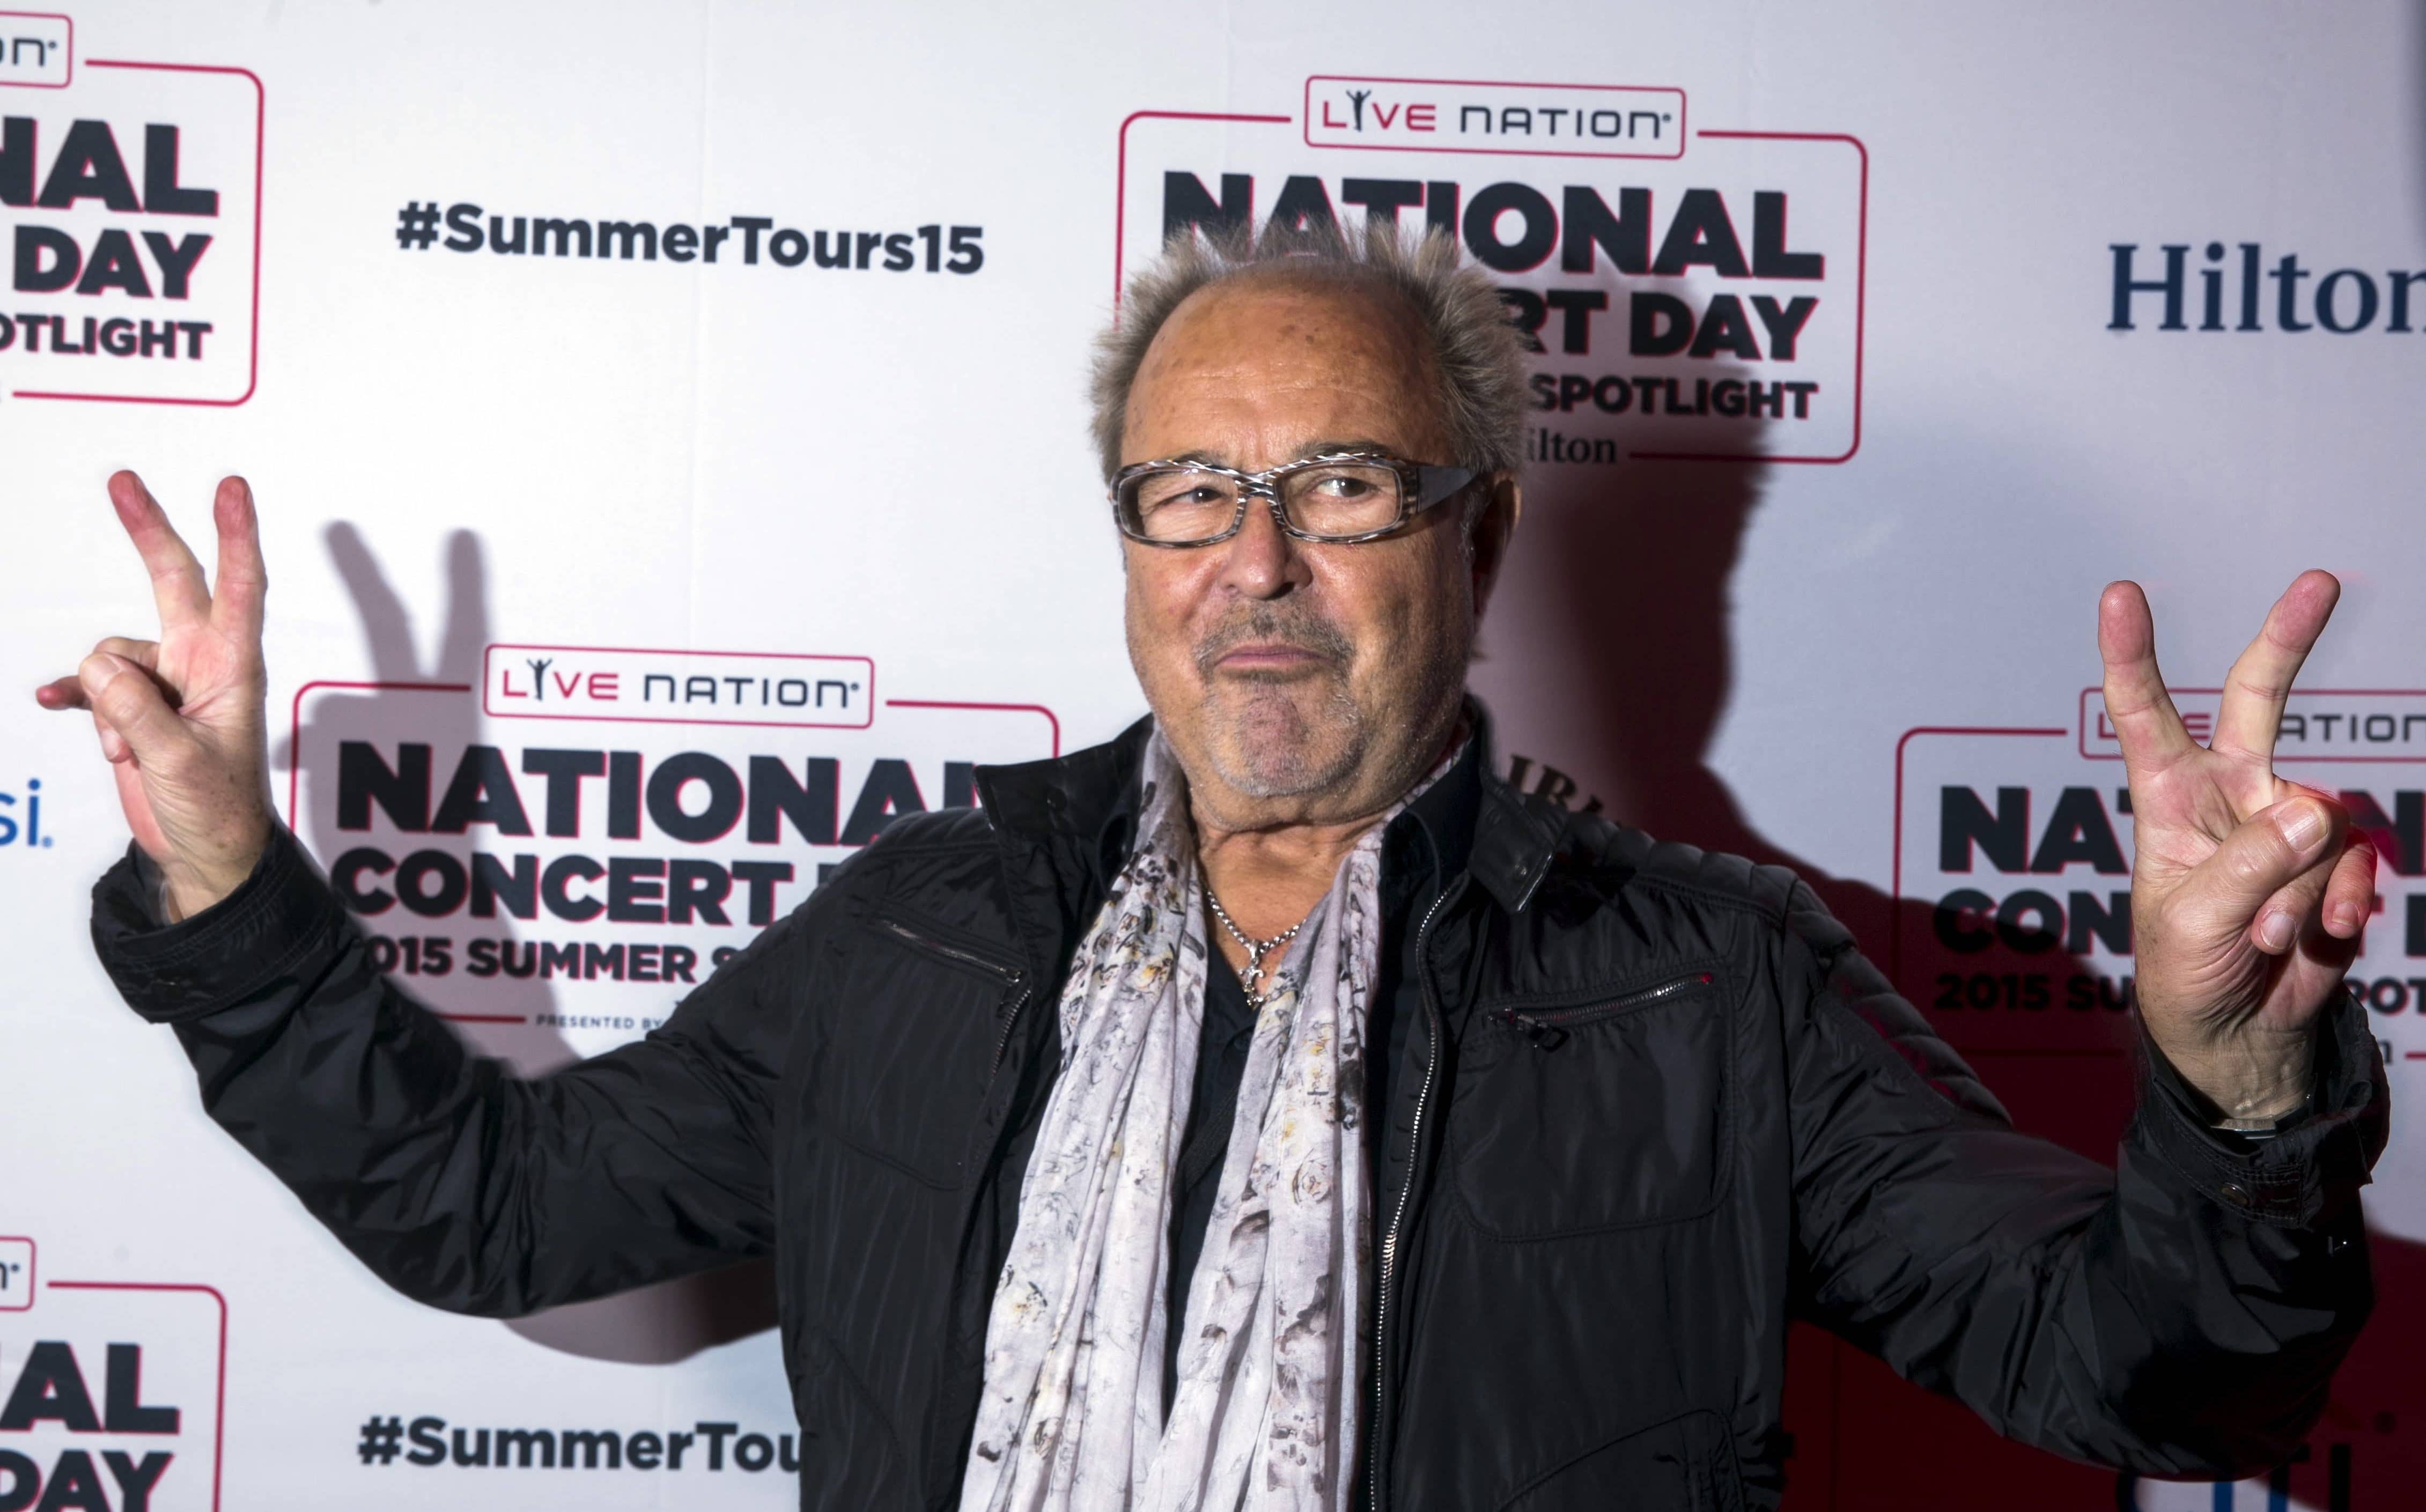 mick-jones-of-rock-band-foreigner-arrives-for-live-nations-national-concert-day-in-new-york